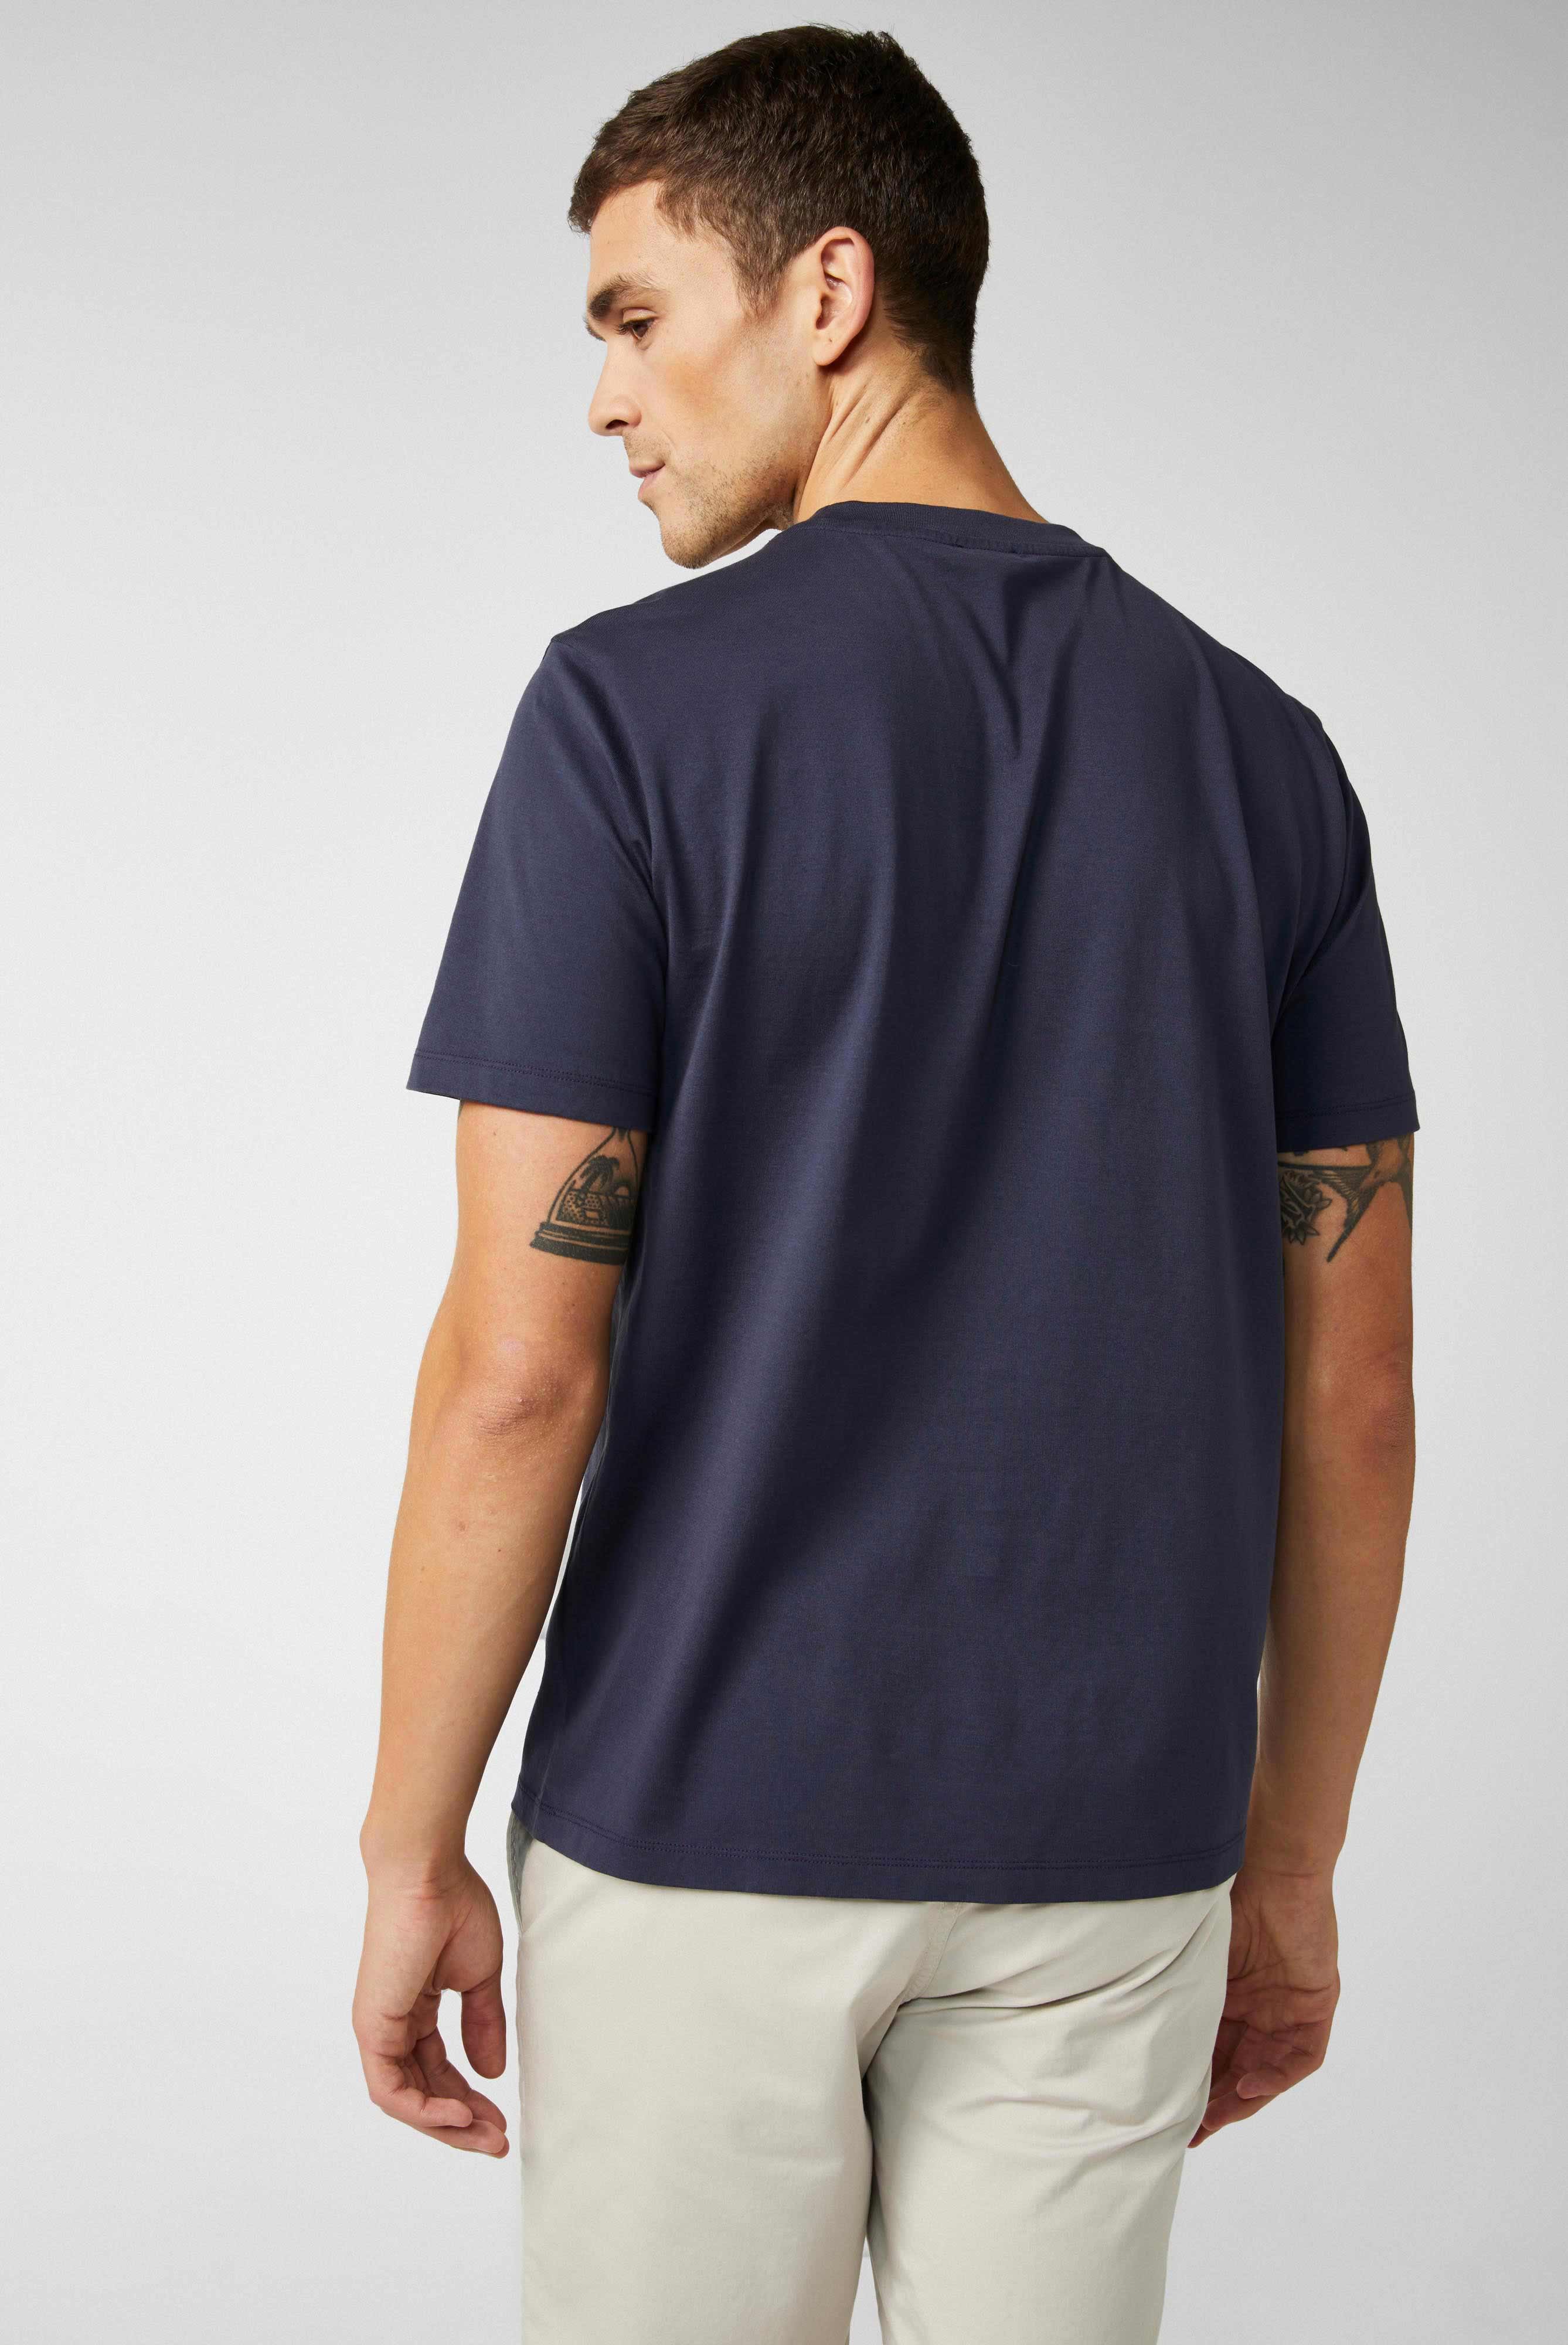 T-Shirts+Relaxed Fit Crew Neck Jersey T-Shirt+20.1660..Z20044.790.M